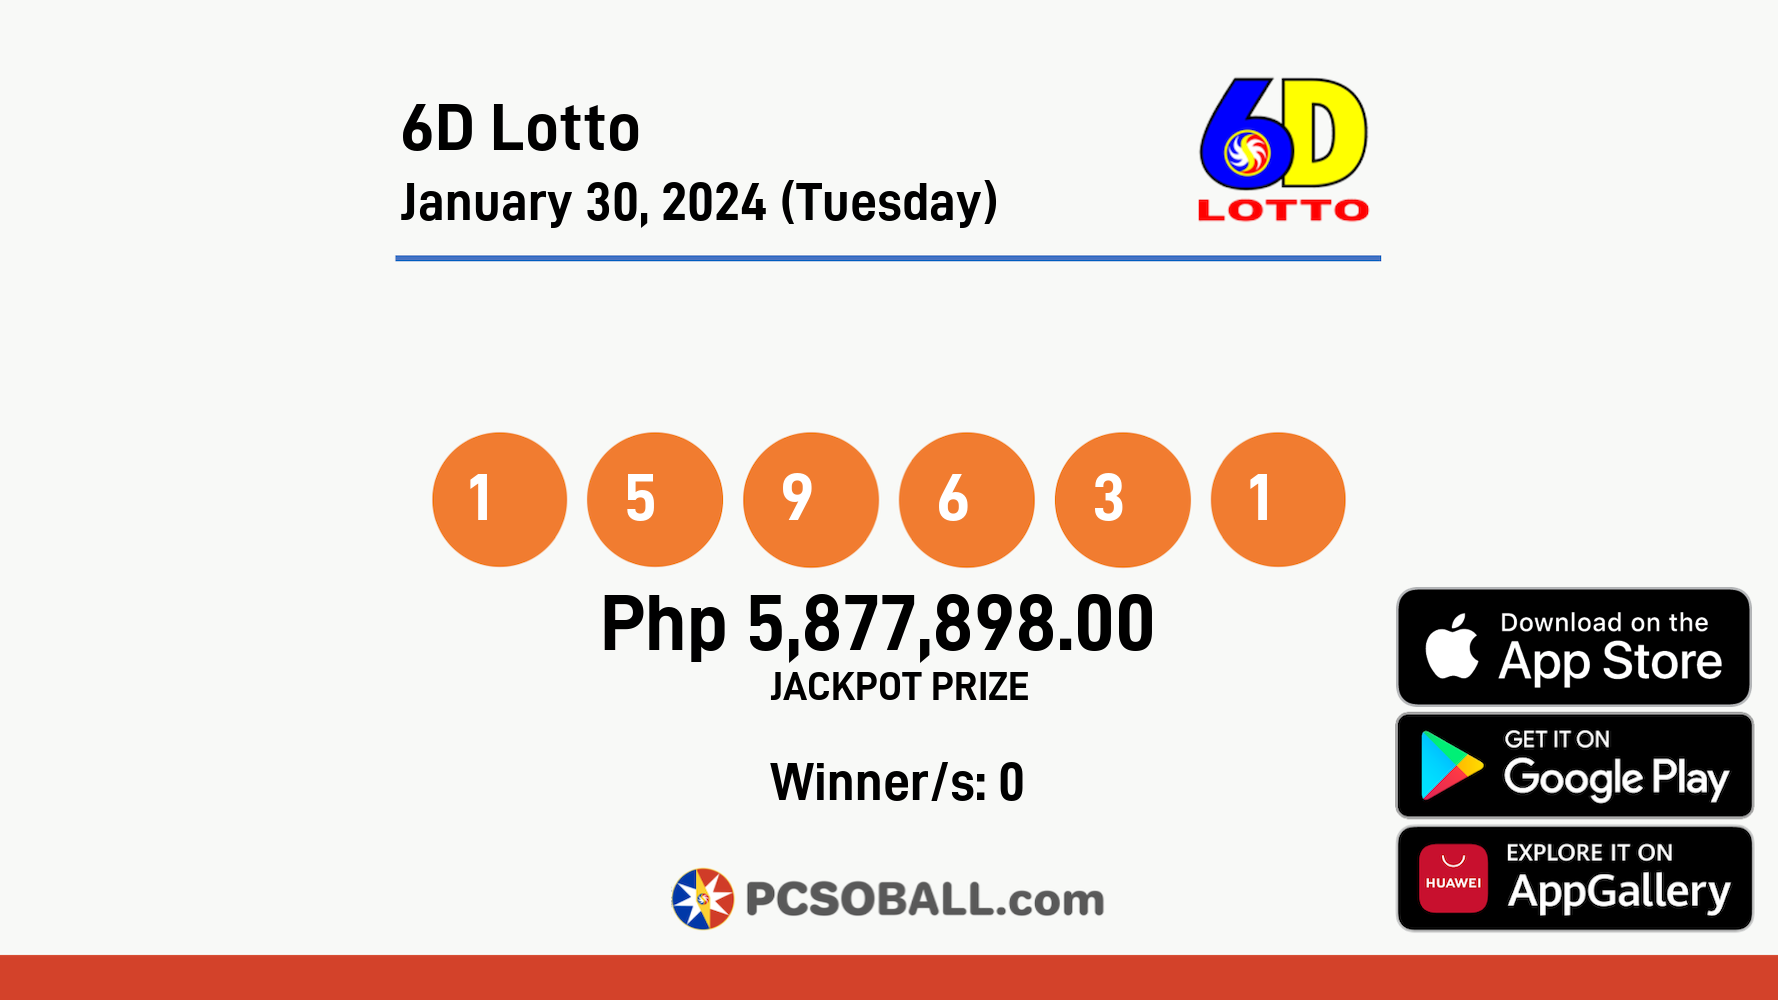 6D Lotto January 30, 2024 (Tuesday) Result